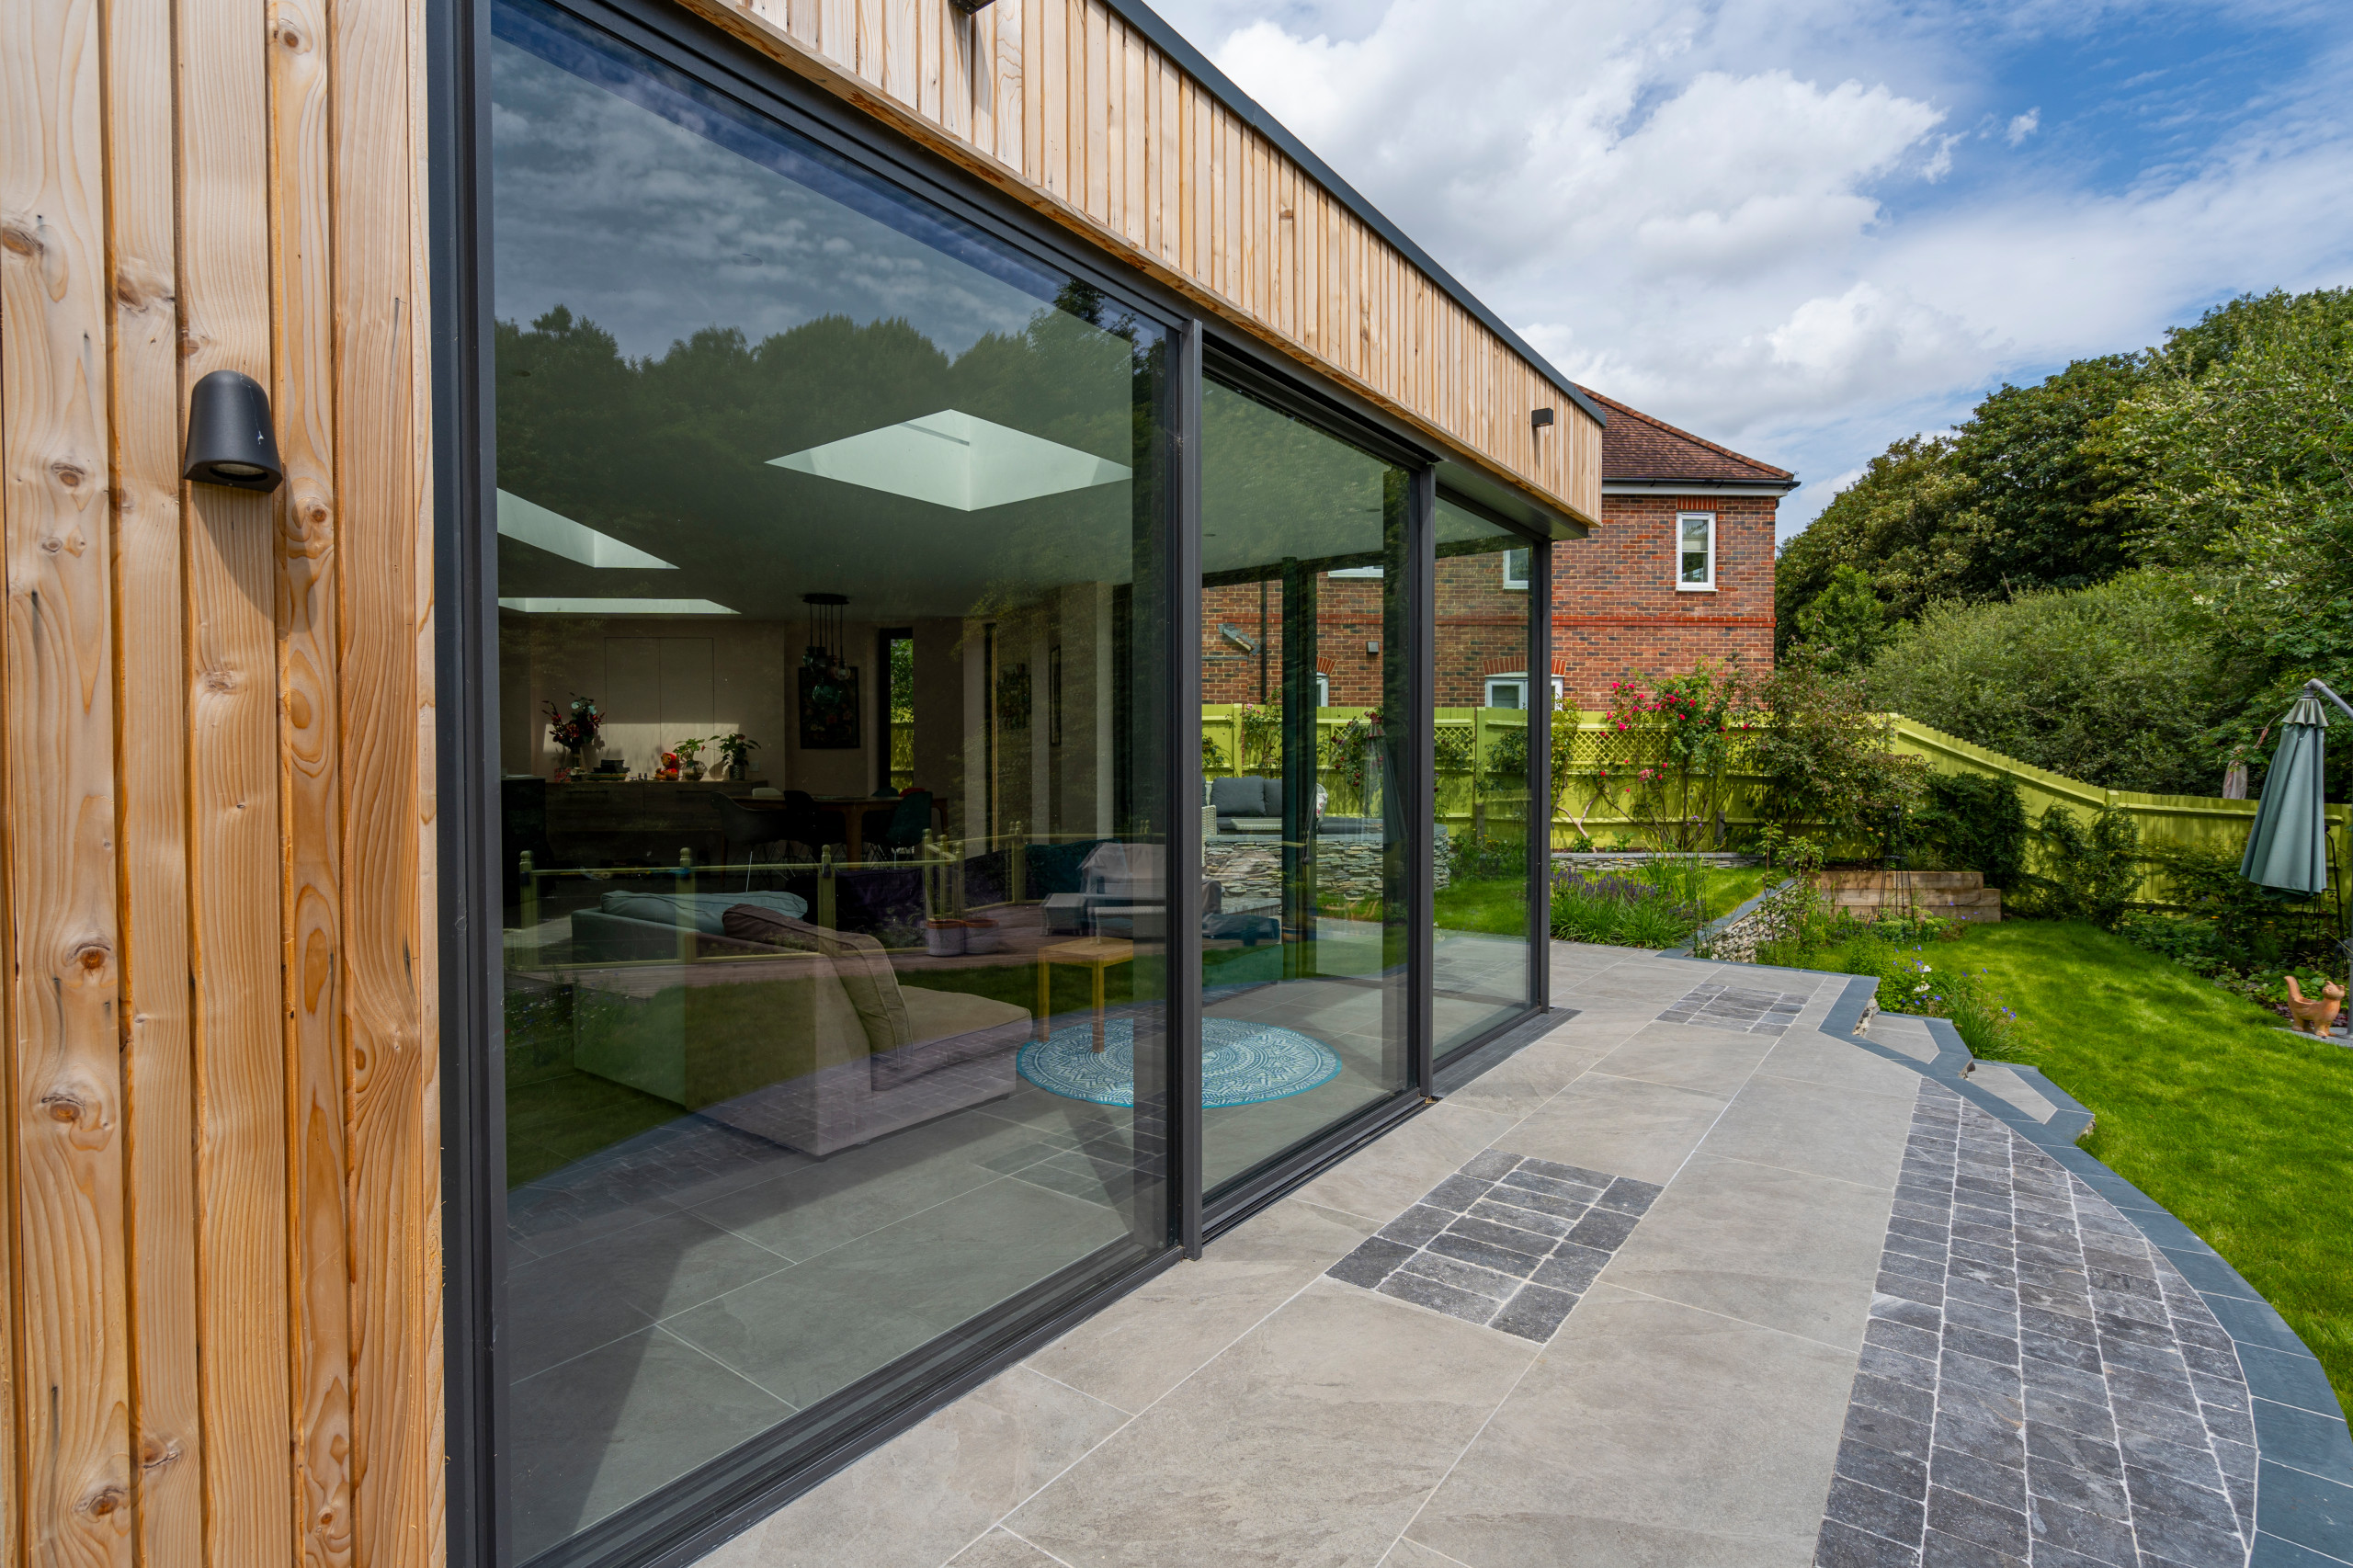 Contemporary Kitchen and Garden Room Room Extension